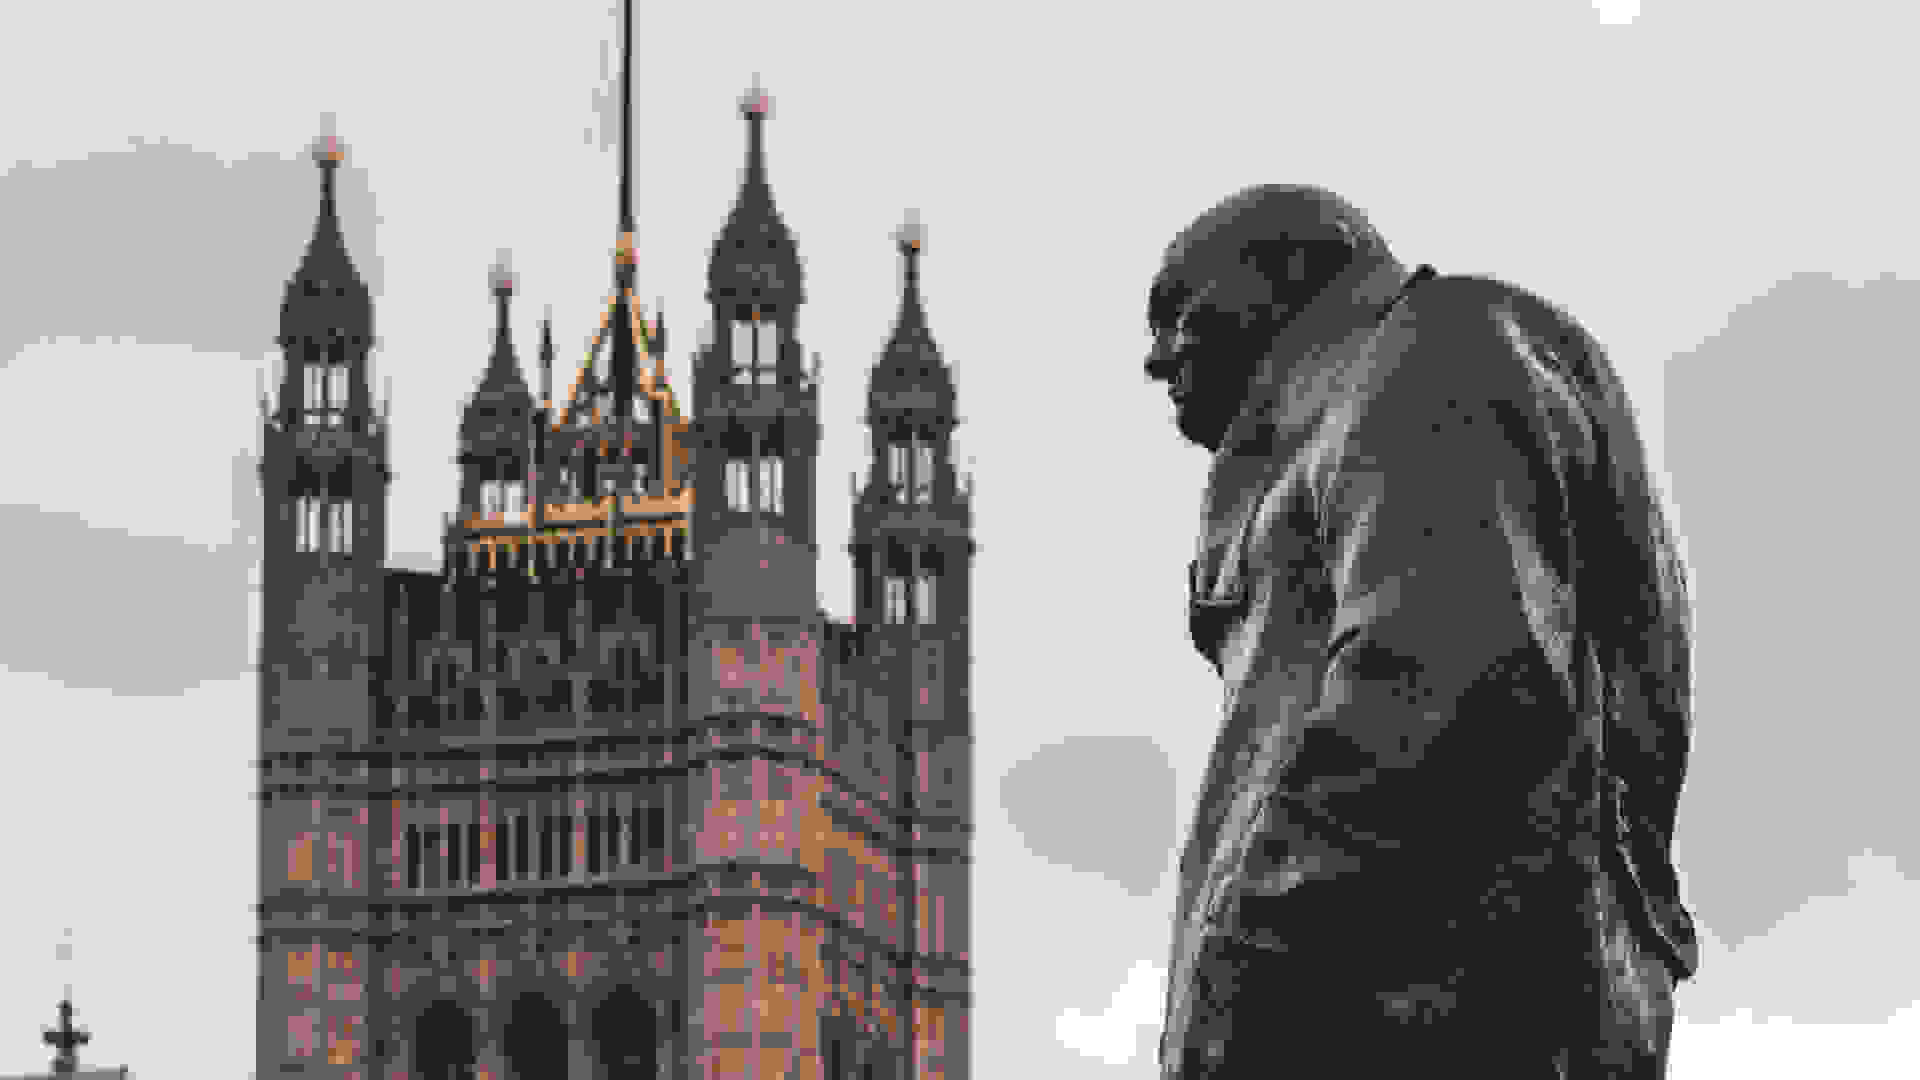 Statue of Winston Churchill in Parliament Square, Westminster. CC